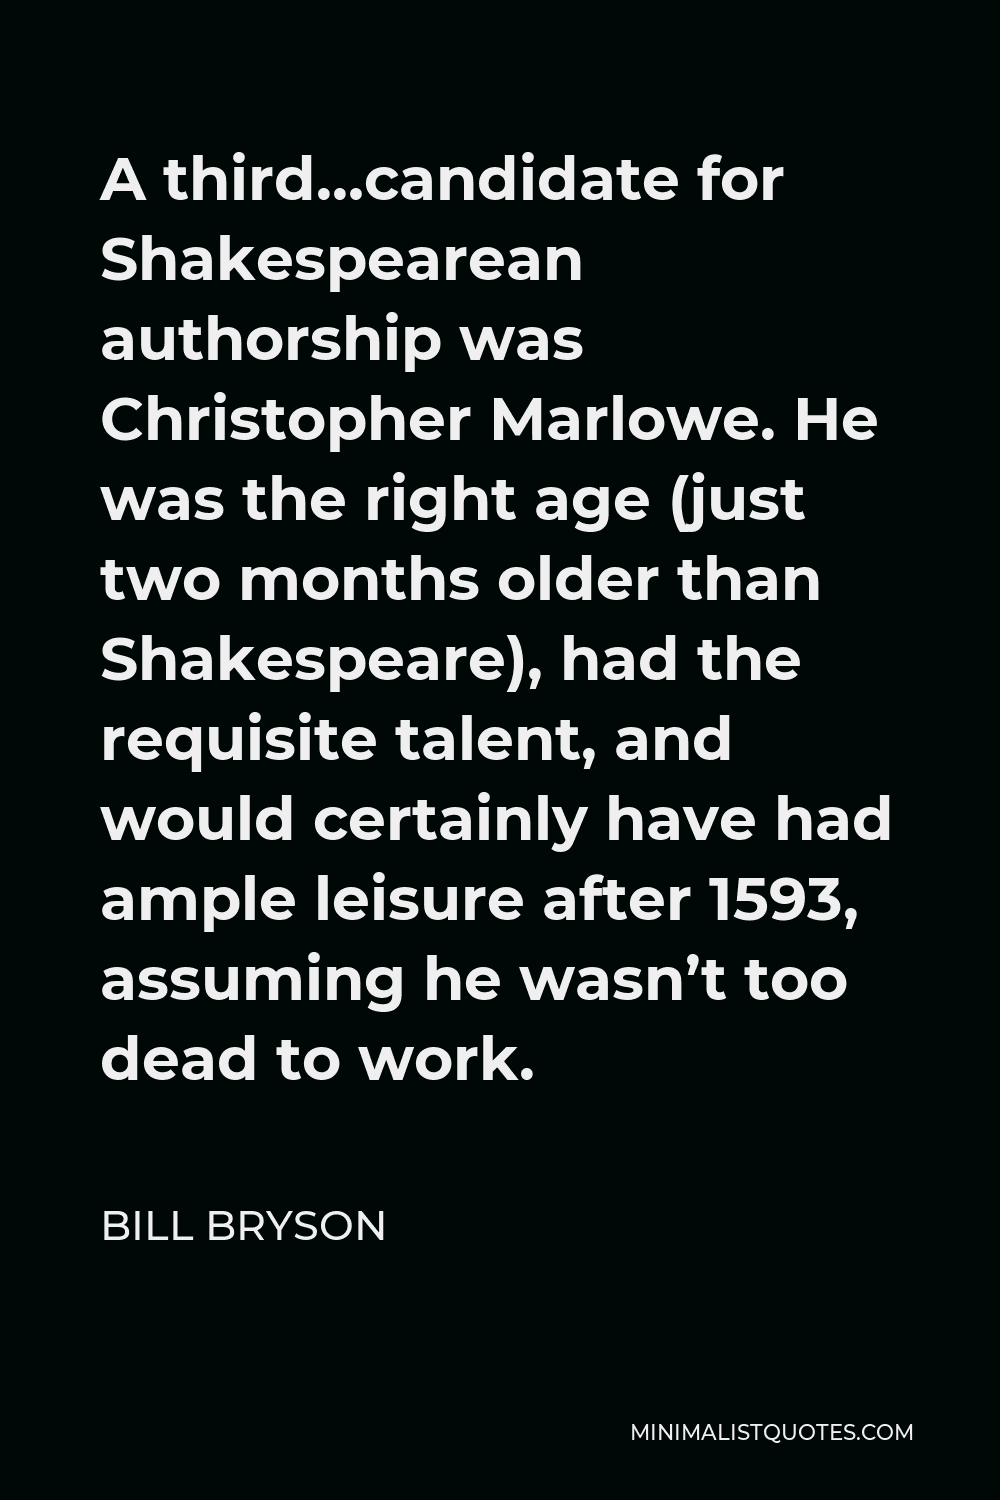 Bill Bryson Quote - A third…candidate for Shakespearean authorship was Christopher Marlowe. He was the right age (just two months older than Shakespeare), had the requisite talent, and would certainly have had ample leisure after 1593, assuming he wasn’t too dead to work.